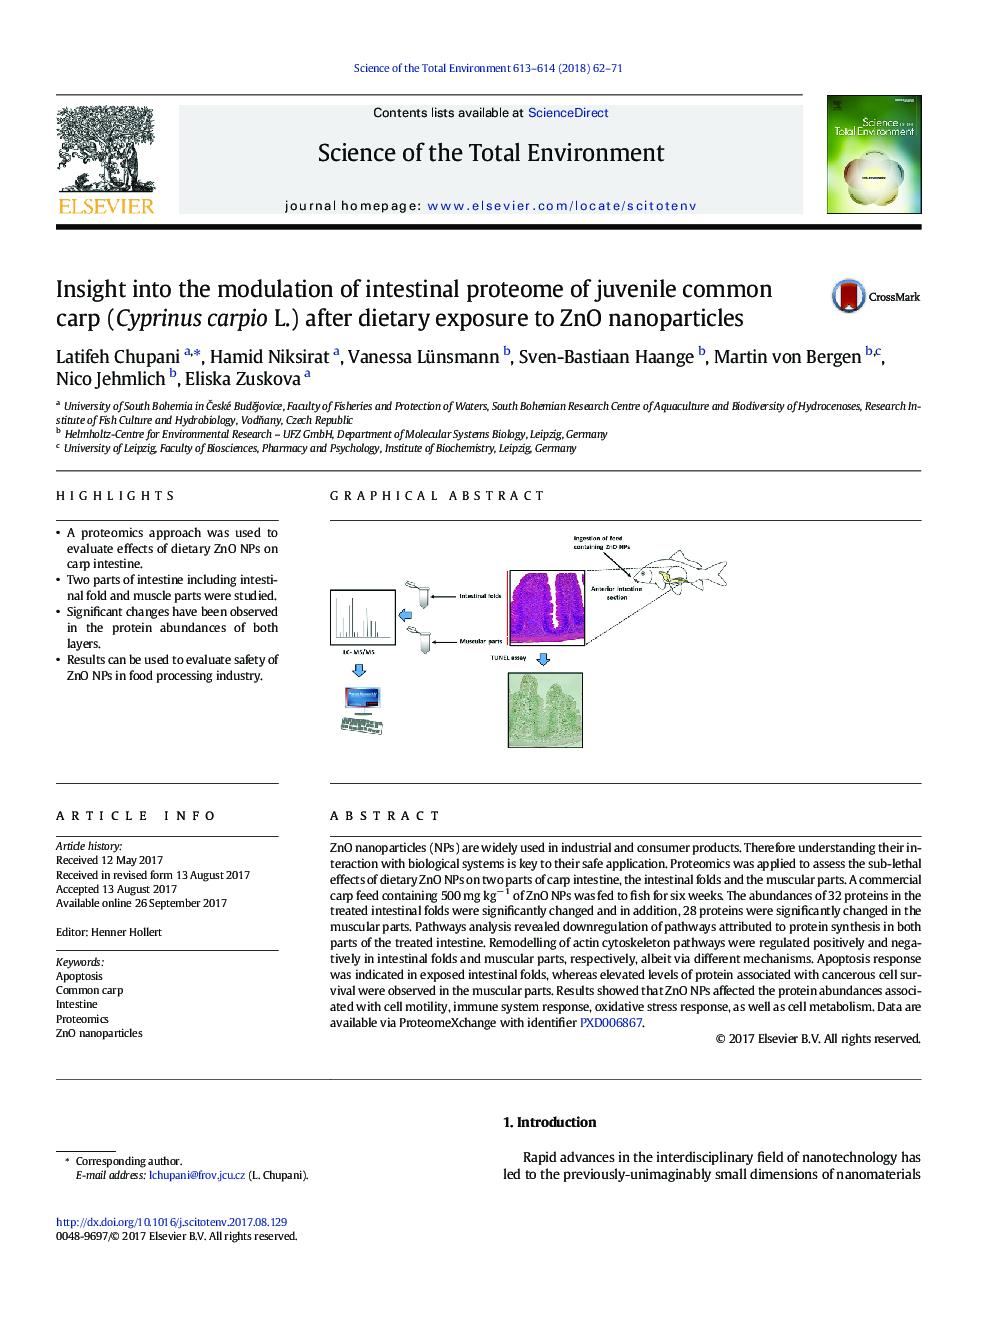 Insight into the modulation of intestinal proteome of juvenile common carp (Cyprinus carpio L.) after dietary exposure to ZnO nanoparticles